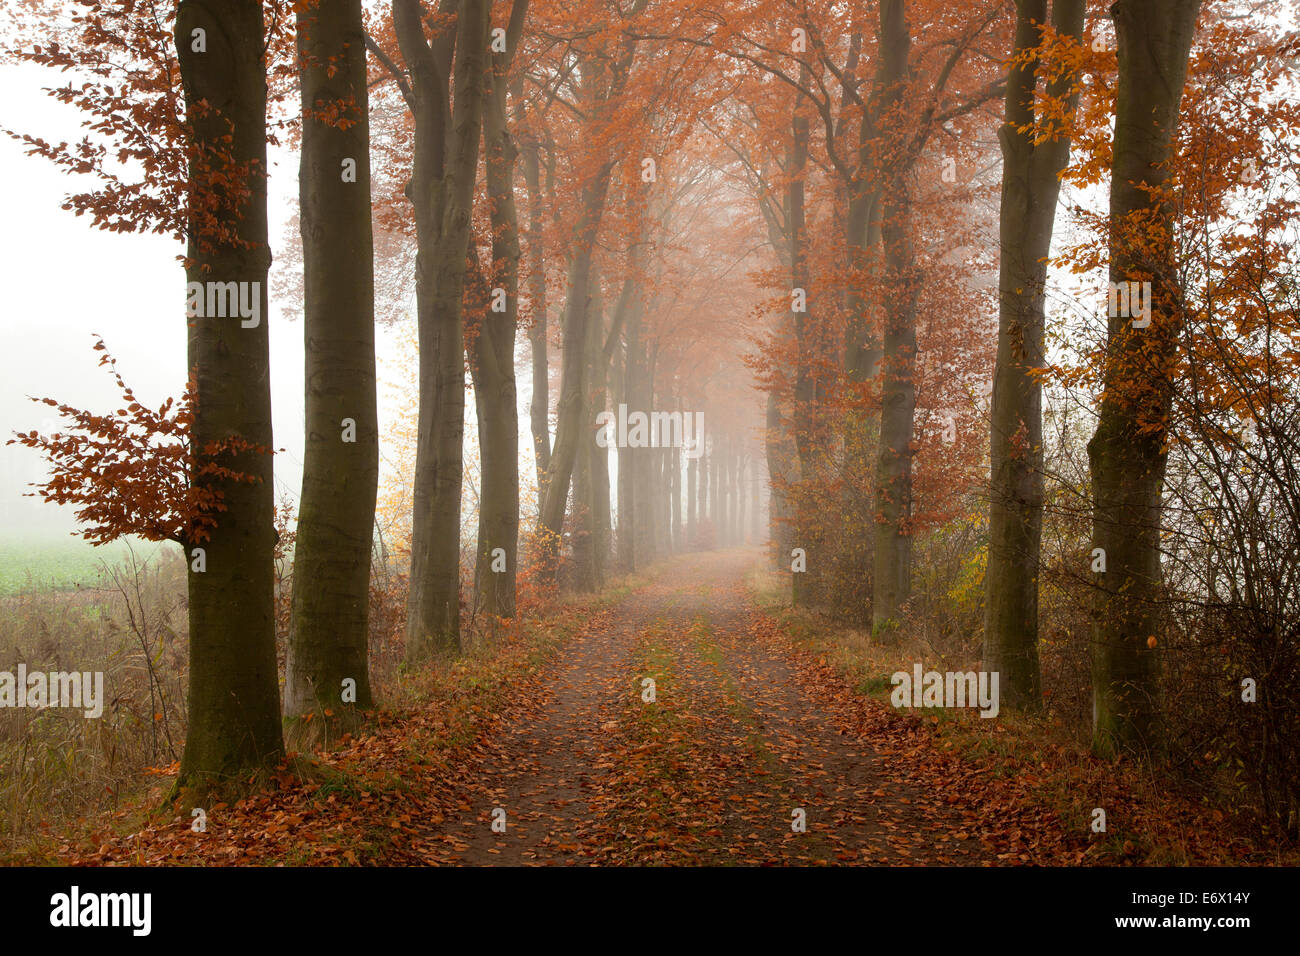 Alley of beech trees, Oldenburger Munsterland, Lower Saxony, Germany Stock Photo